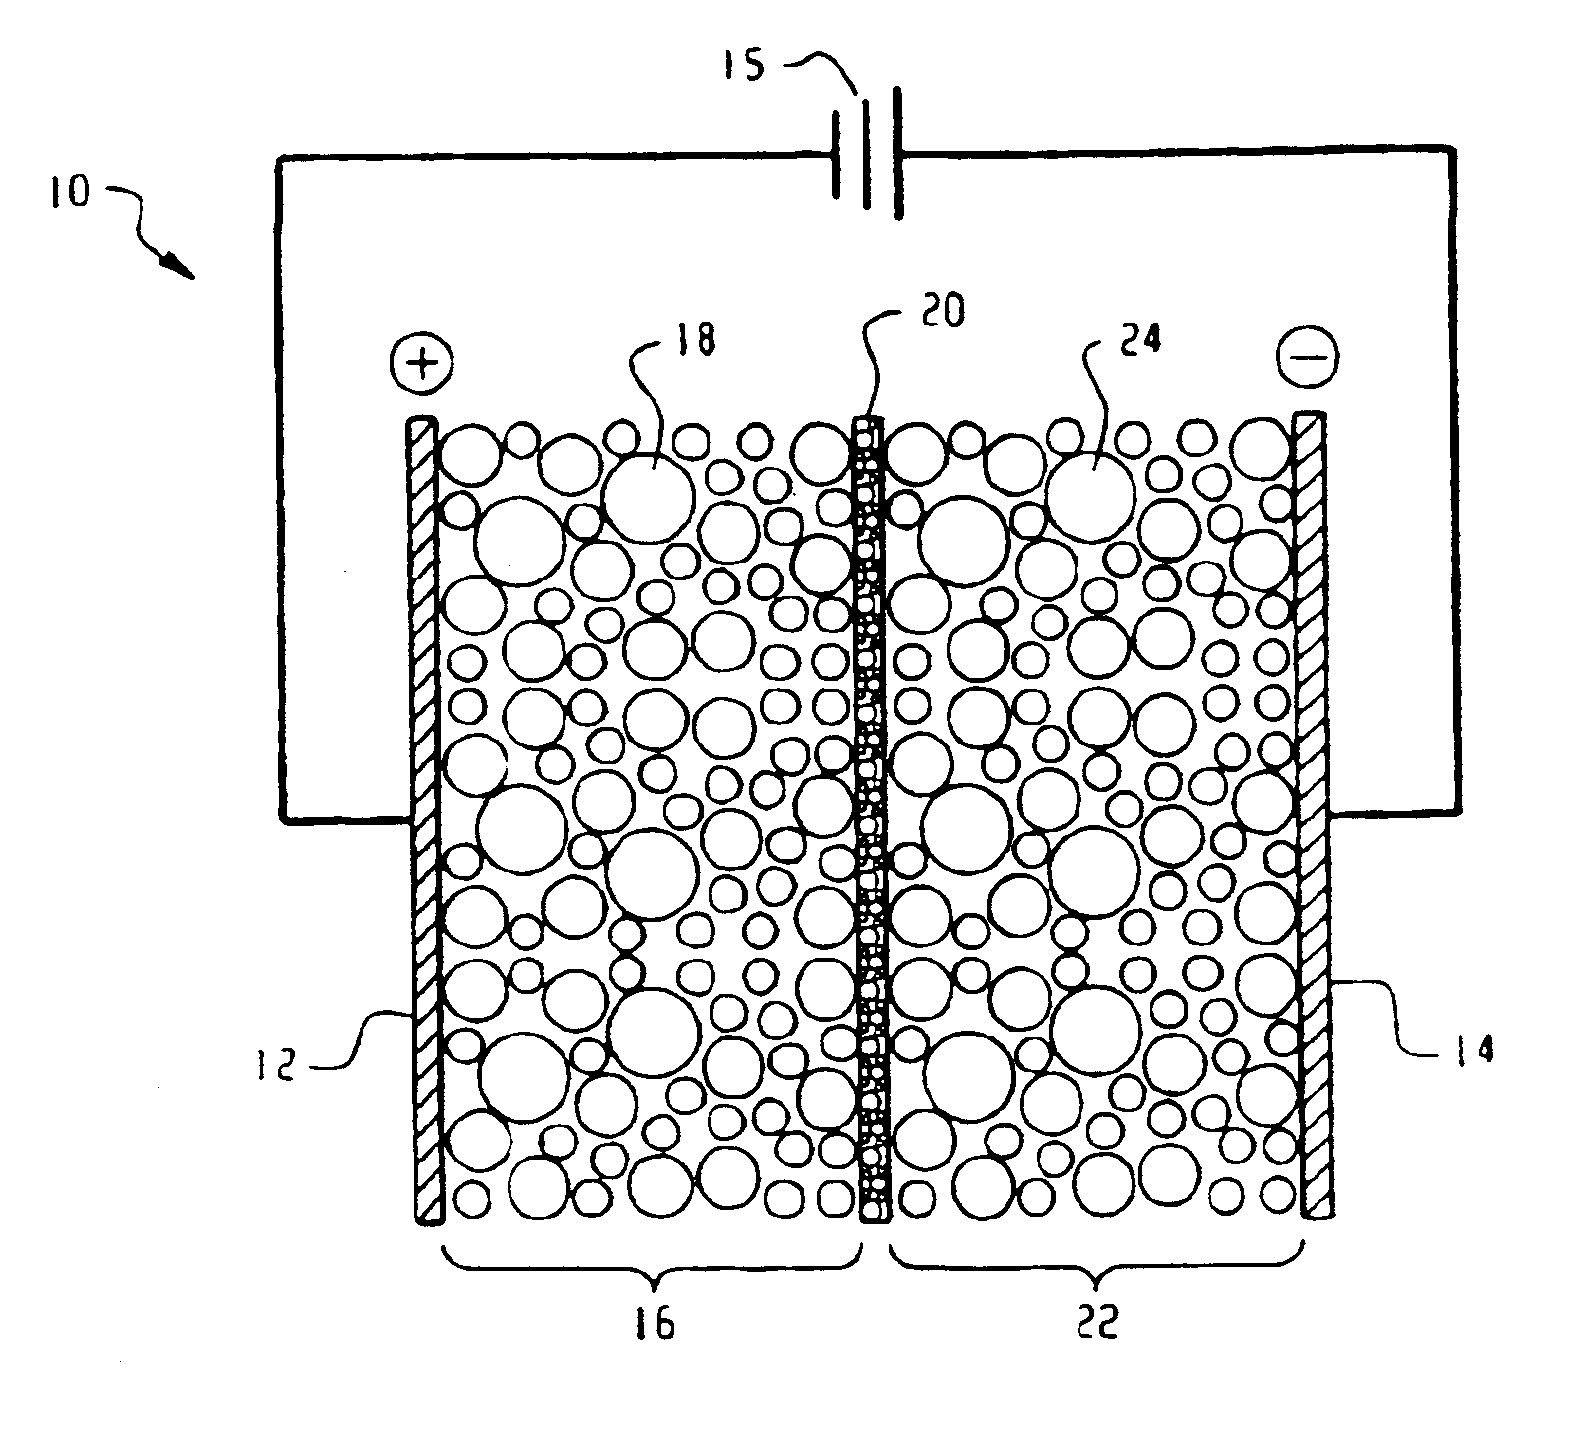 Electrolytic process and apparatus